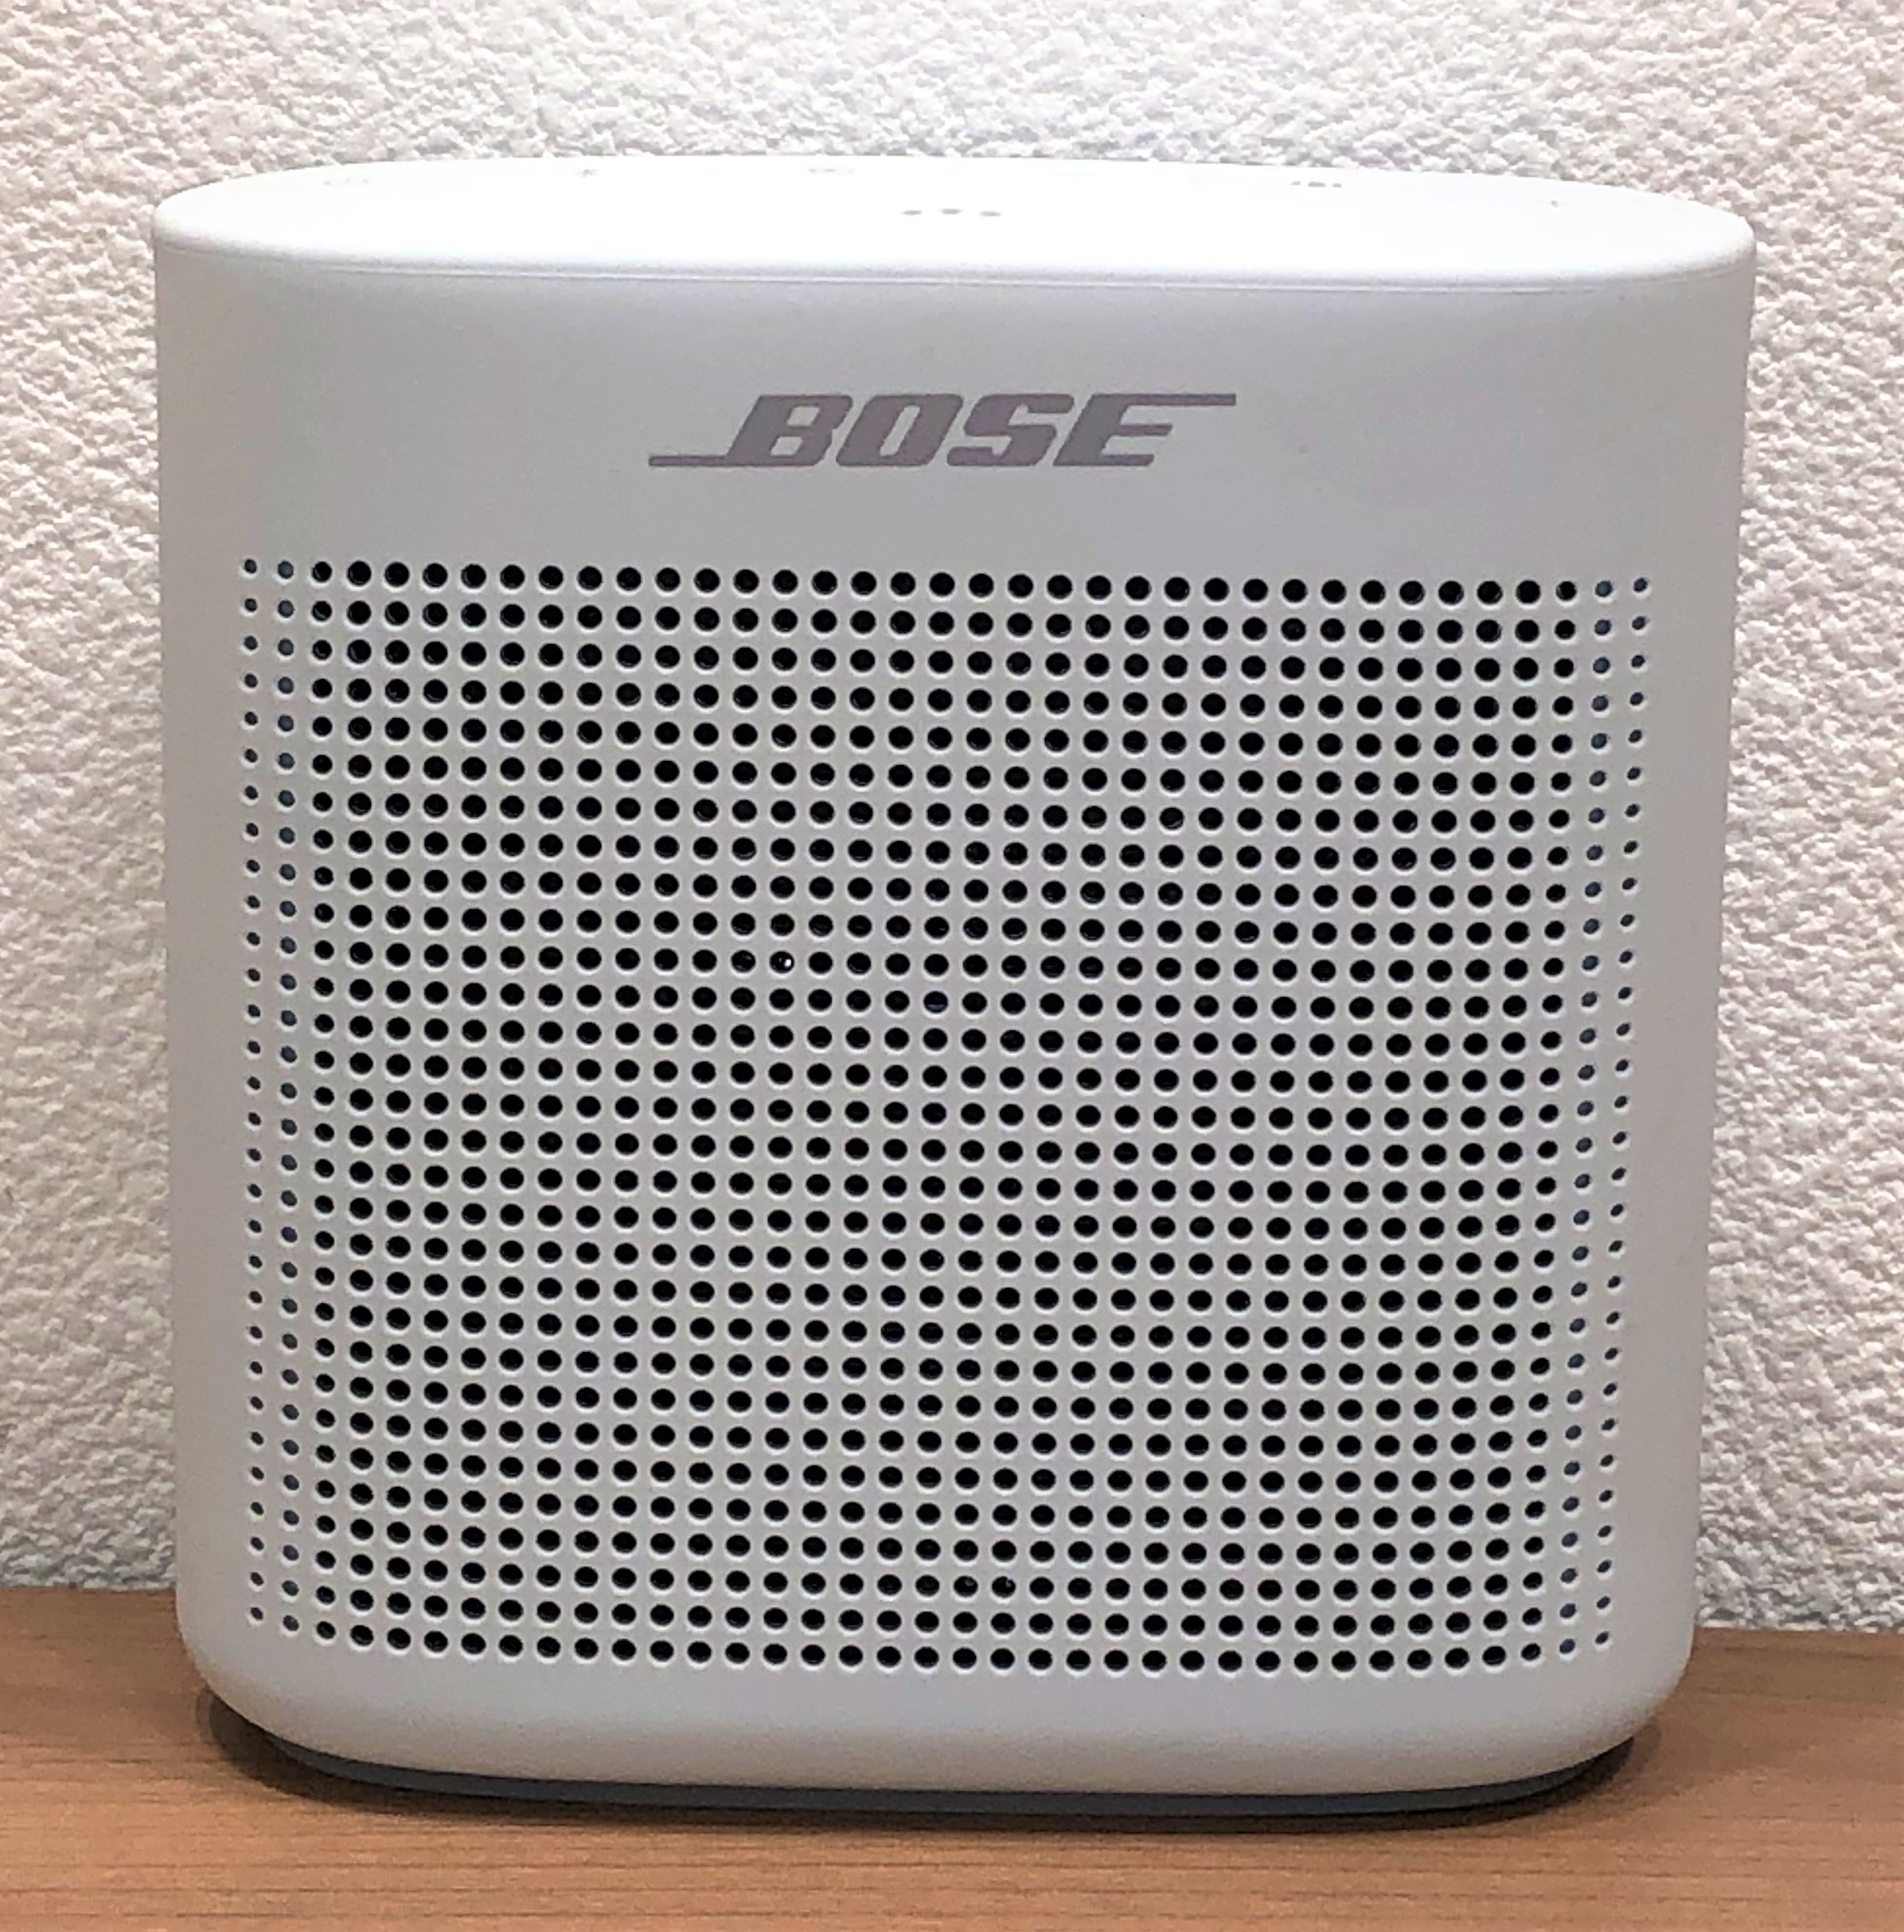 【BOSE/ボーズ】SOUNDLINK COLOR II ポータブルワイヤレススピーカー Bluetooth